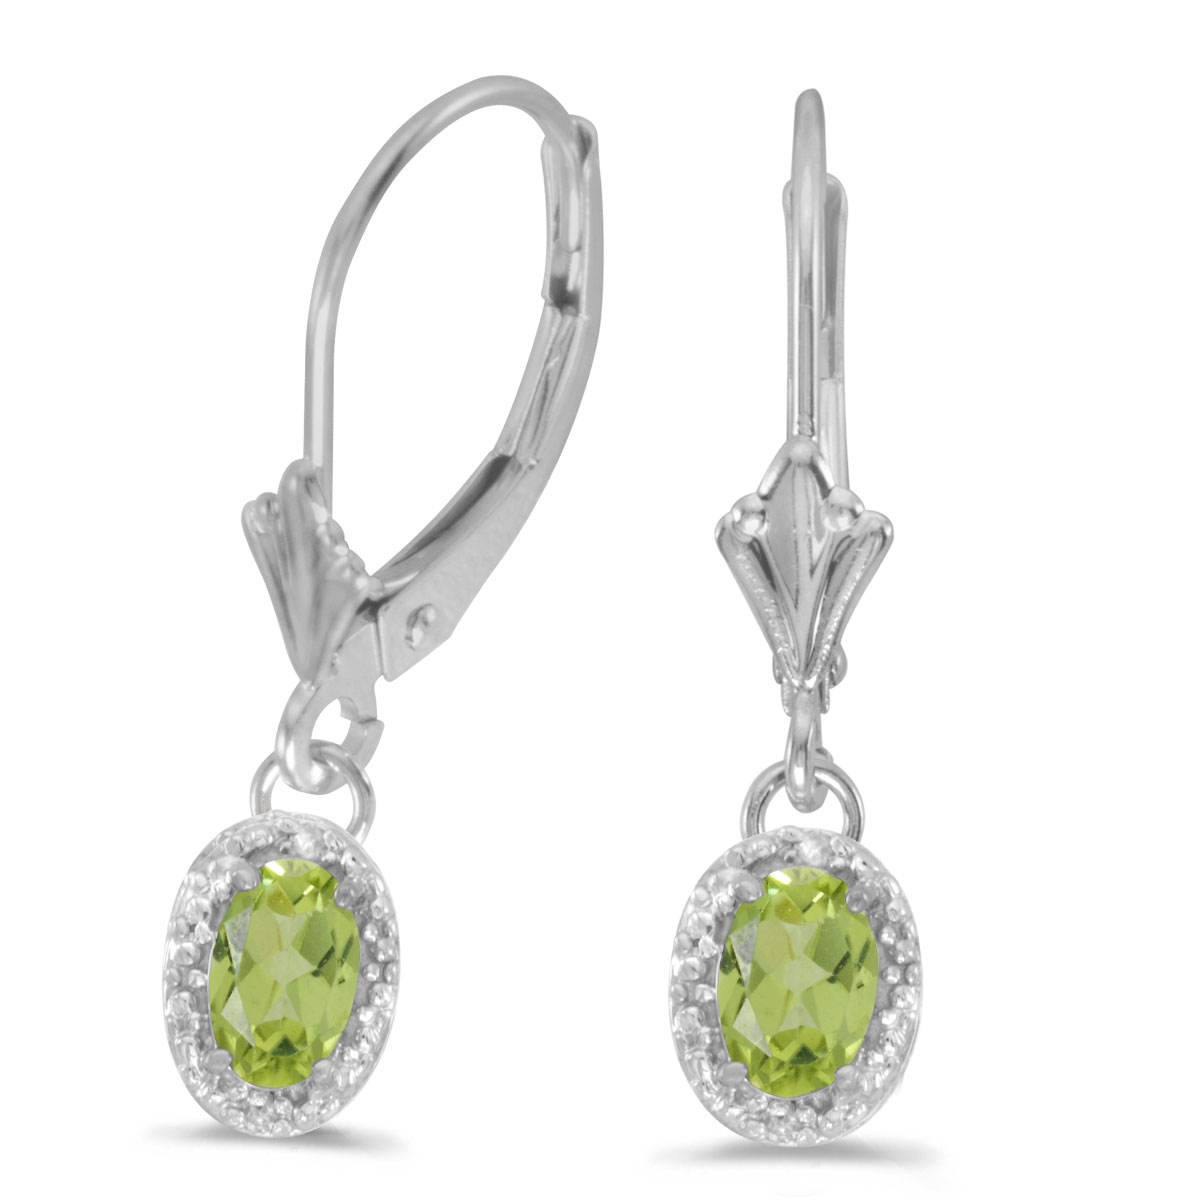 JCX2127: Beautiful 10k white gold leverback earrings with pretty 6x4 mm peridots complemented with bright diamonds.